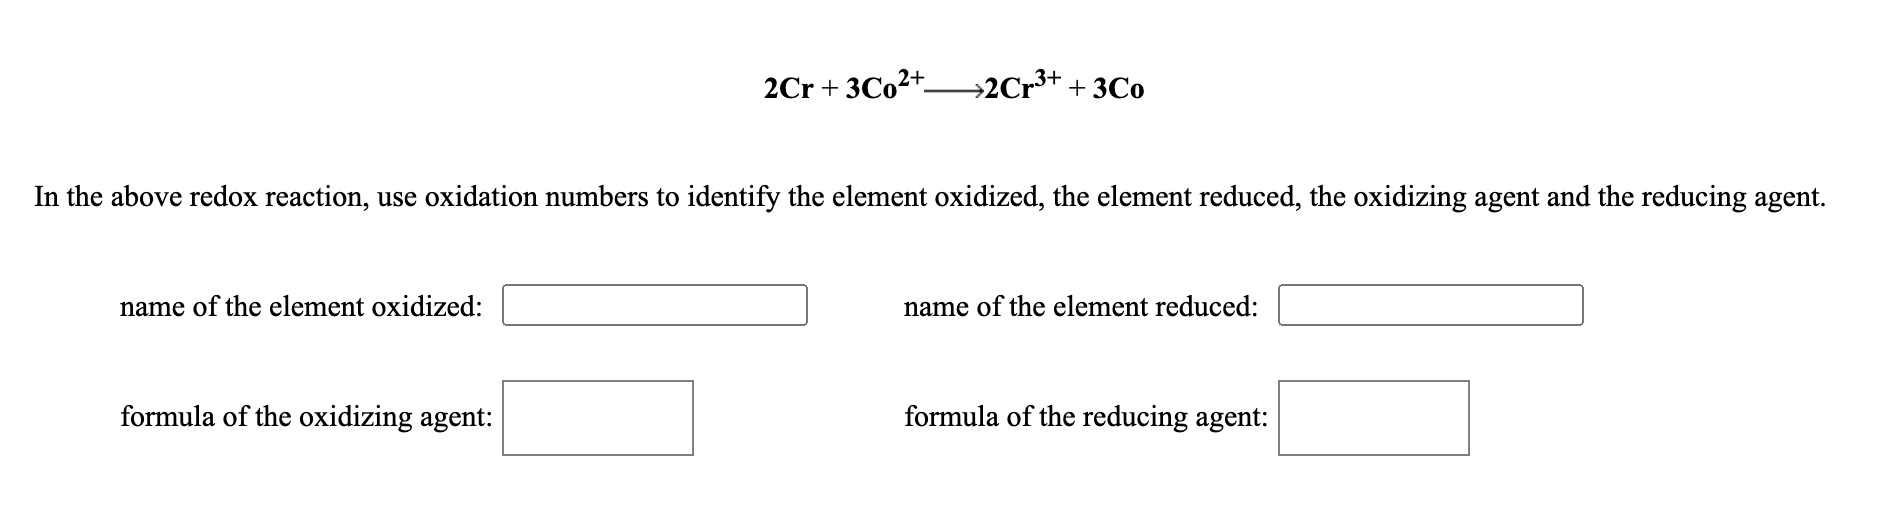 2Cr + 3C0²+–→2Cr³+ + 3Co
In the above redox reaction, use oxidation numbers to identify the element oxidized, the element reduced, the oxidizing agent and the reducing agent.
name of the element oxidized:
name of the element reduced:
formula of the oxidizing agent:
formula of the reducing agent:
